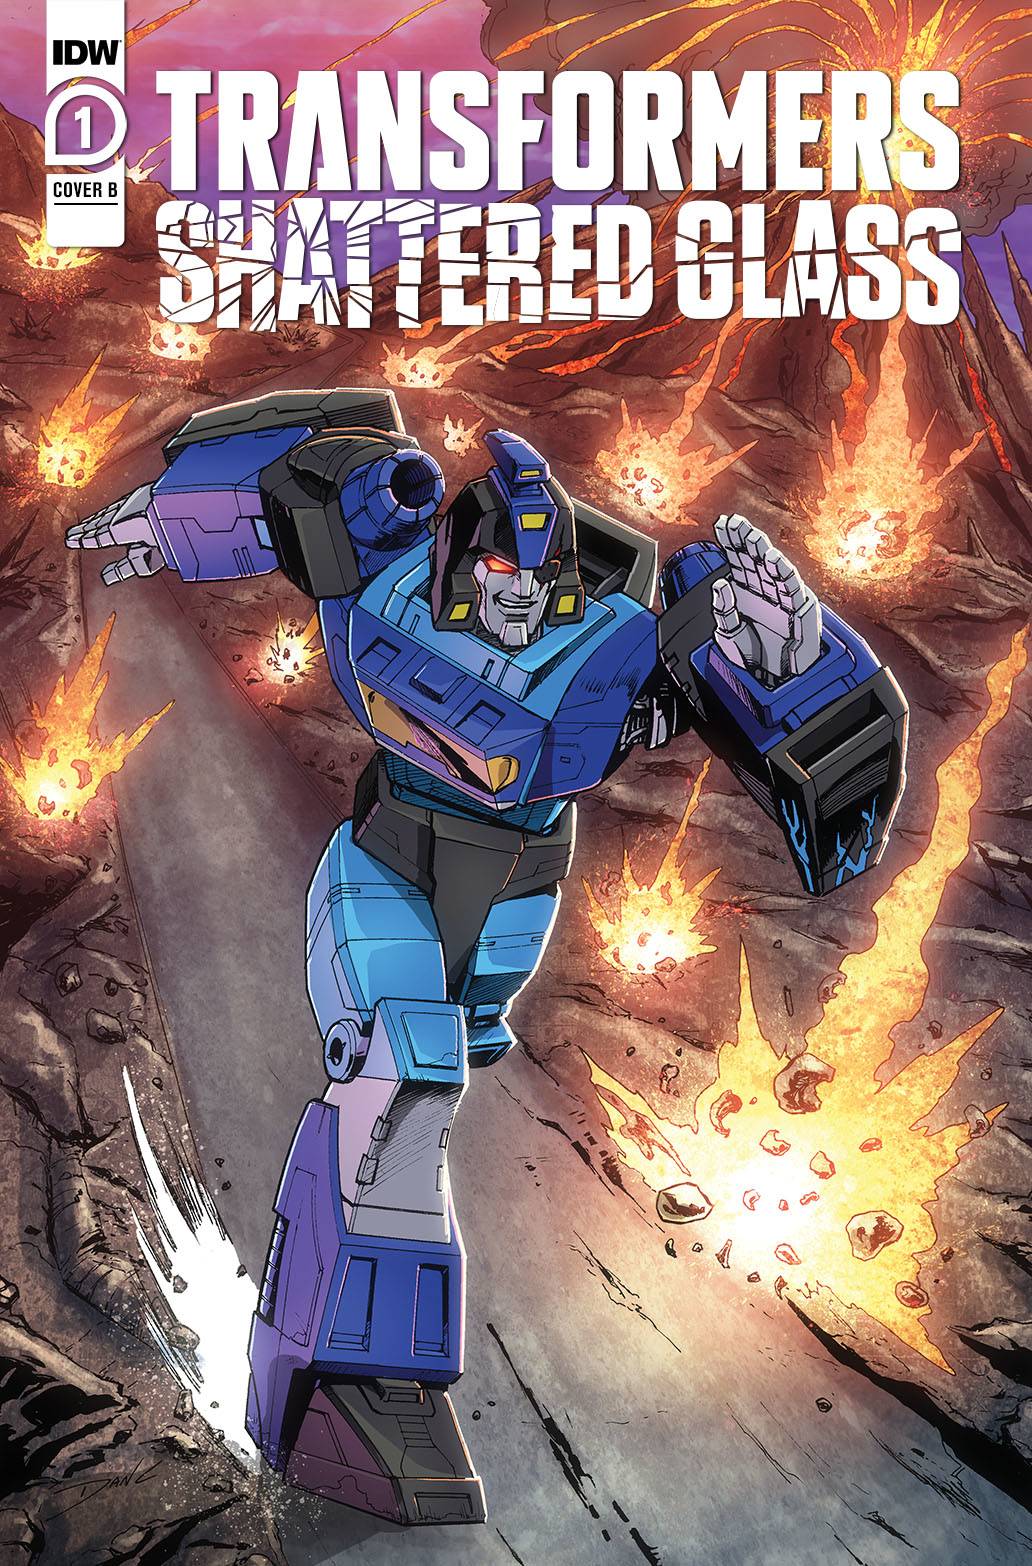 TRANSFORMERS SHATTERED GLASS